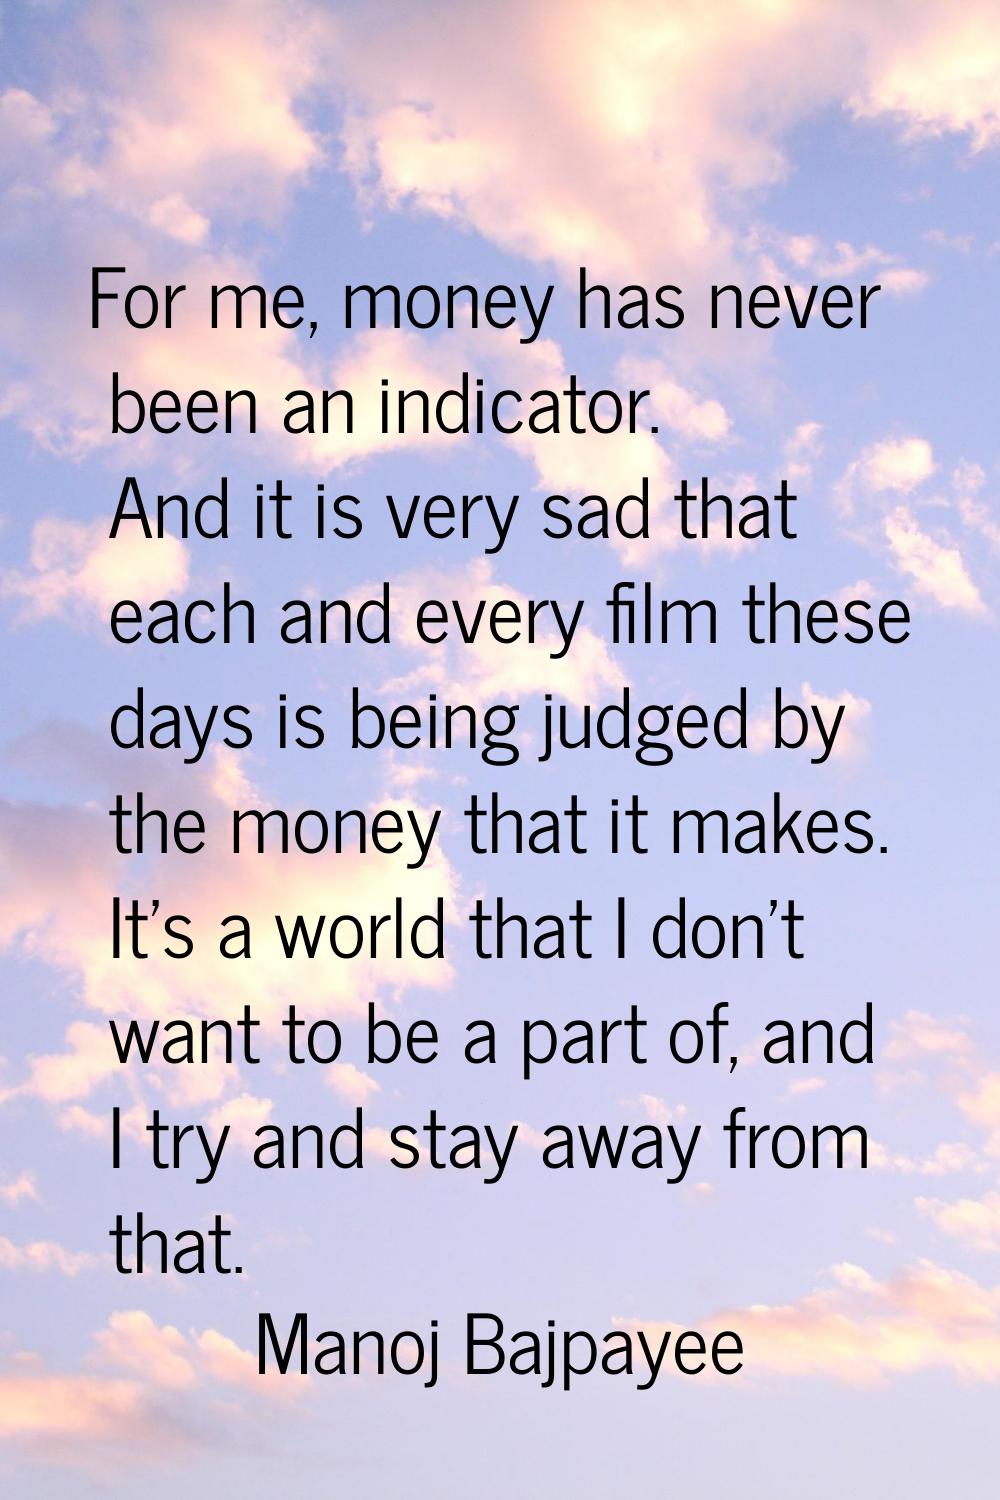 For me, money has never been an indicator. And it is very sad that each and every film these days i